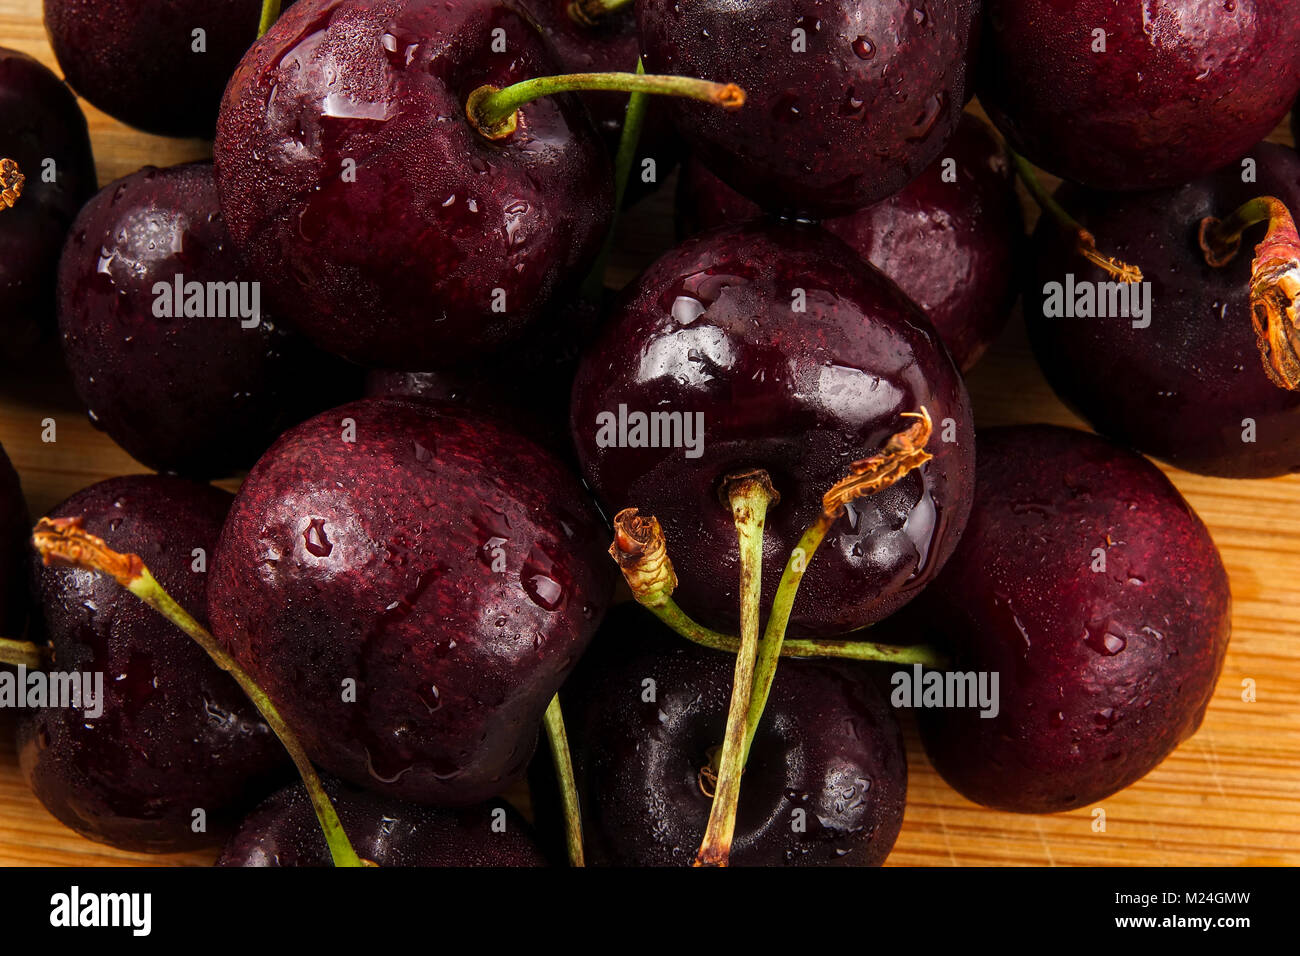 Sweet red cherries on a wooden background. Stock Photo